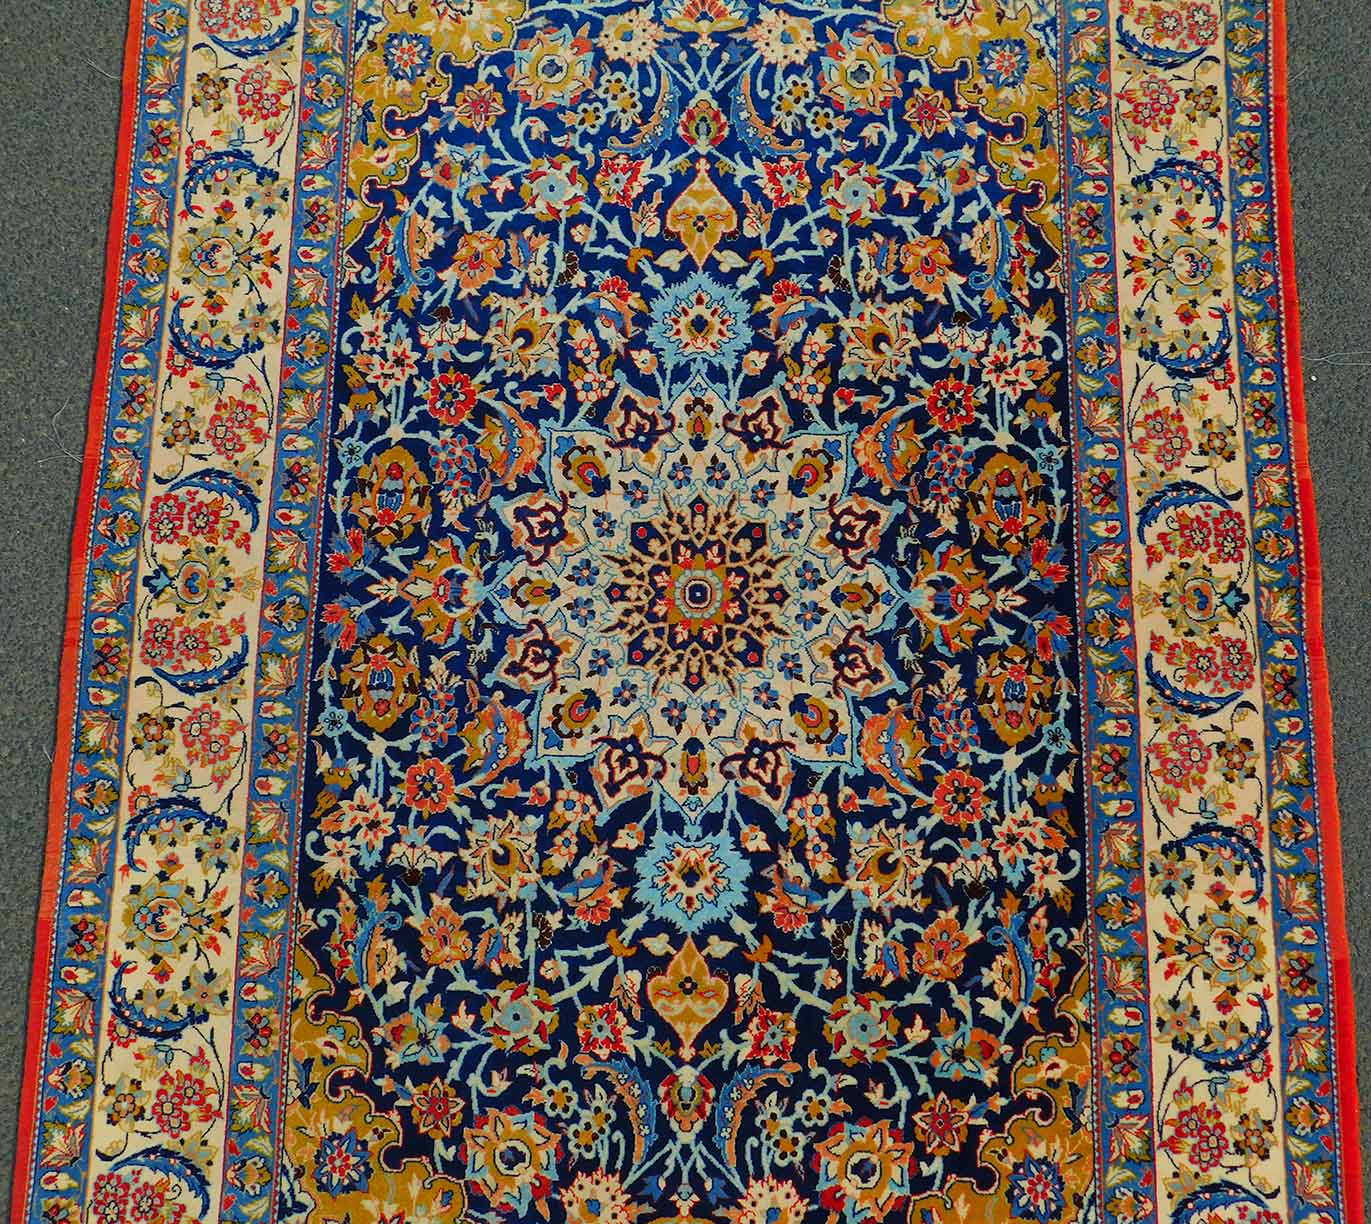 Isfahan Teppich. Extrem feine Knüpfung. - Image 3 of 6